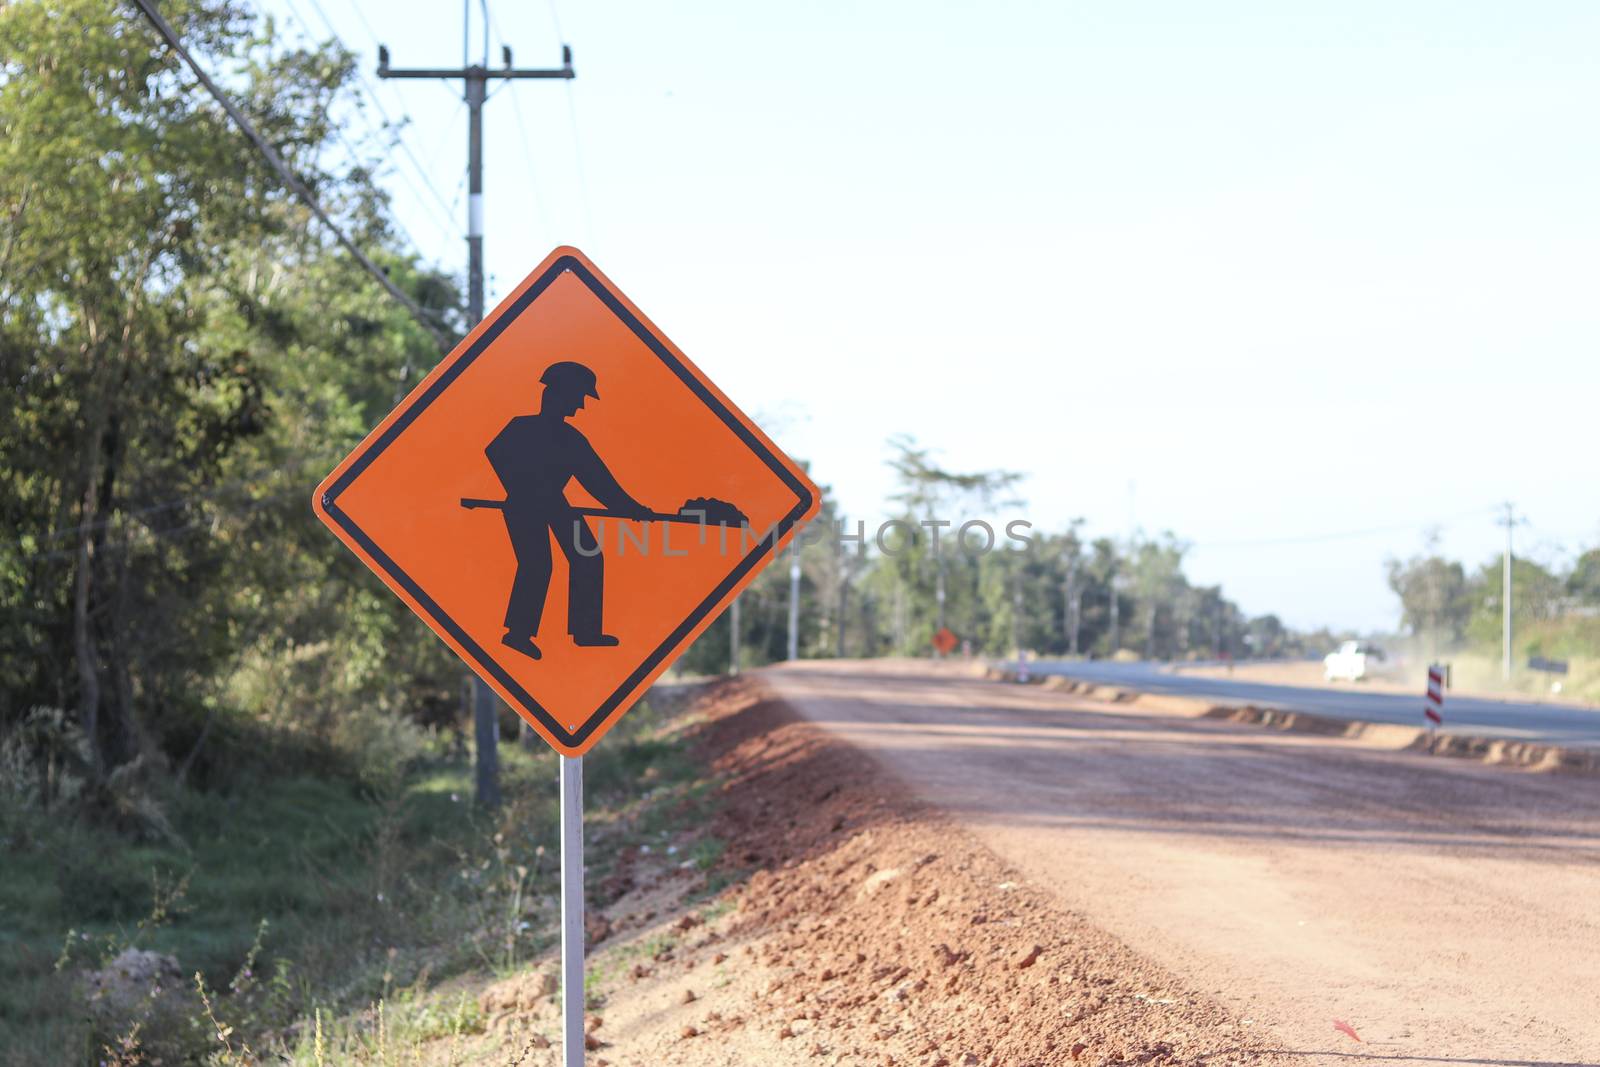 The orange sign shows a symbol with the image of a person holding a shovel on the sign installed on the side of the construction road. Warning sign indicating road work is ahead. by Eungsuwat